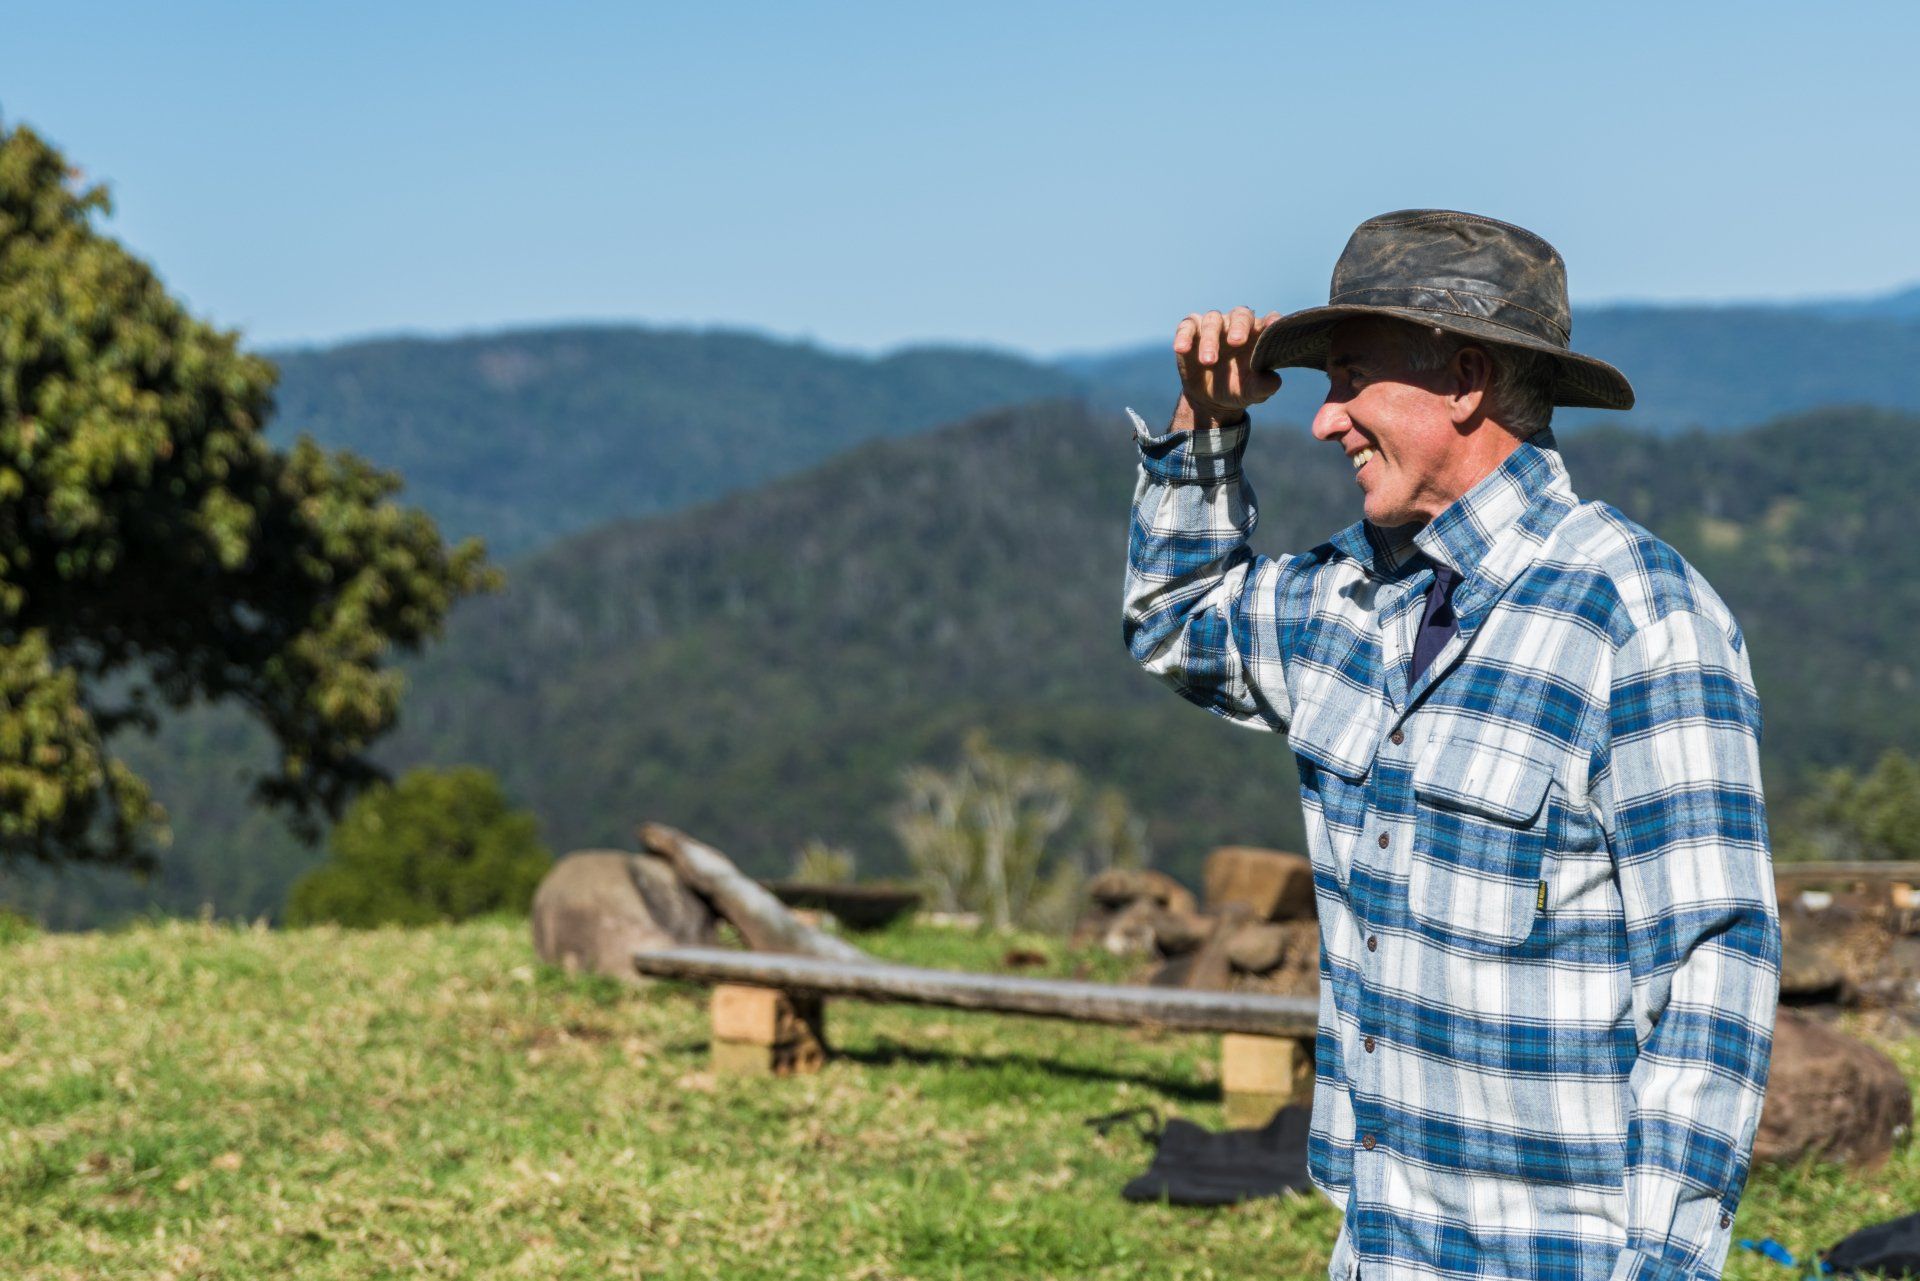 a man in a plaid shirt and hat is standing in a field with mountains in the background .